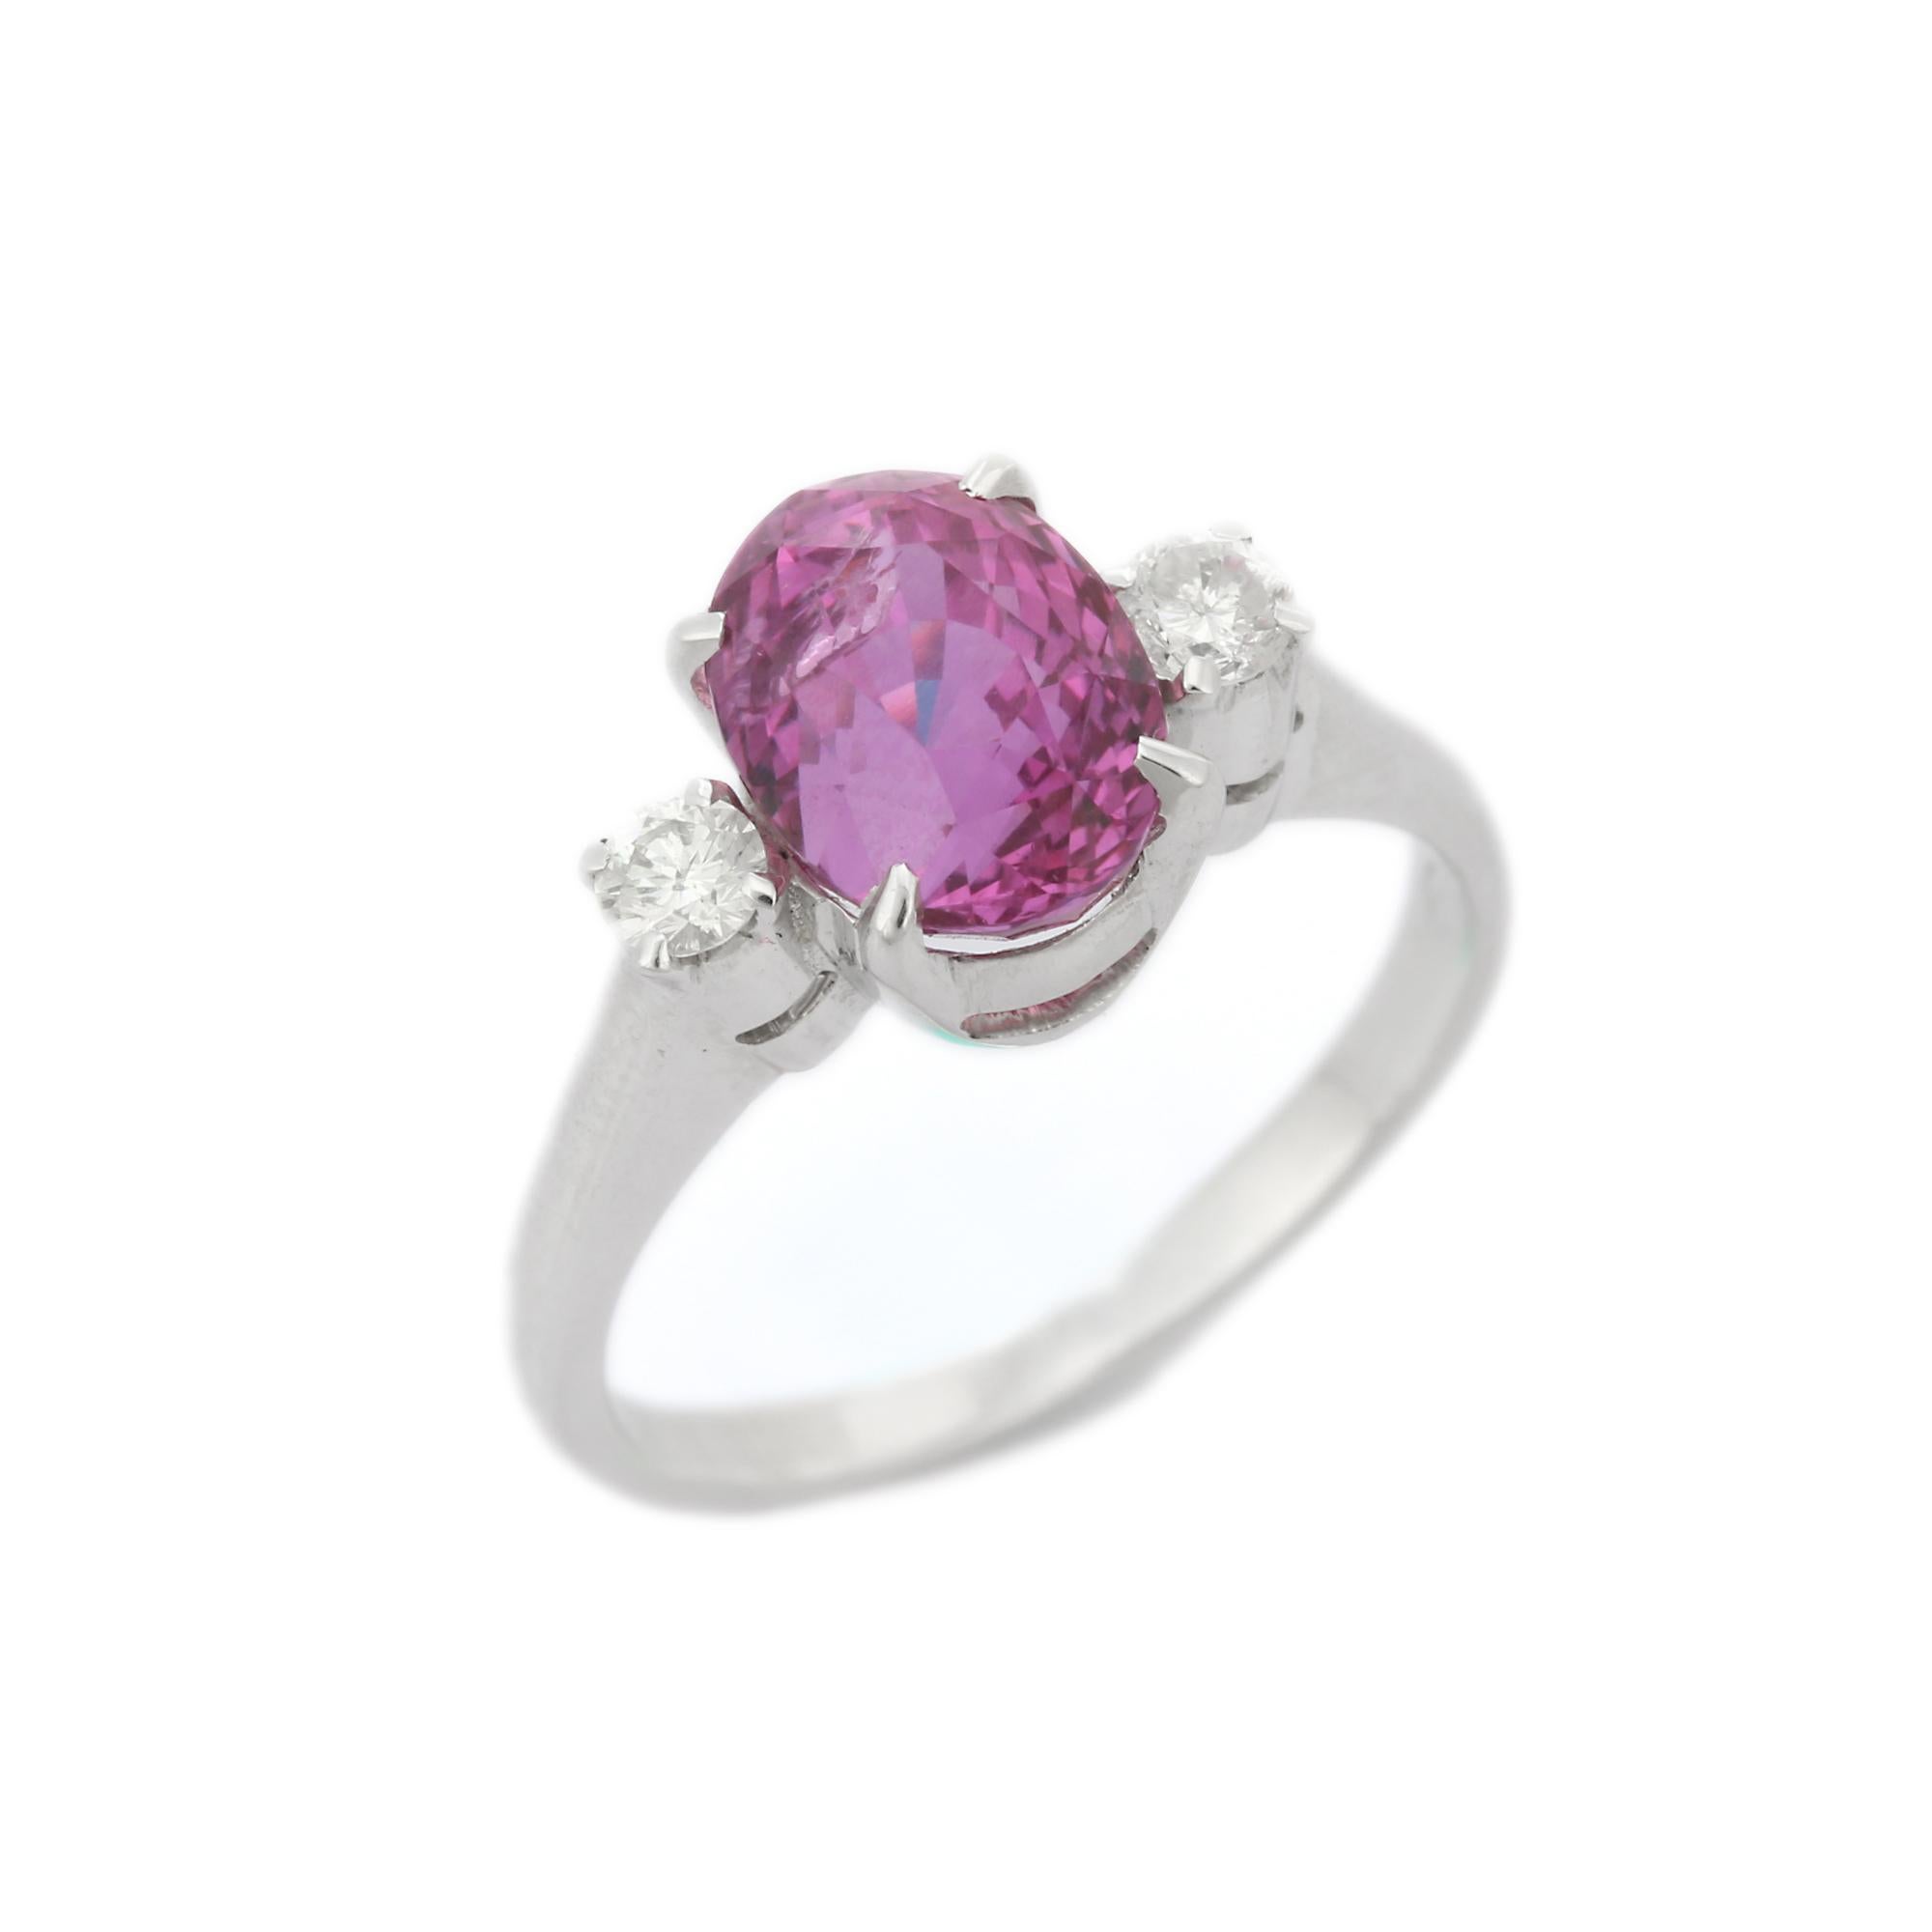 For Sale:  3.66 Carat Three Stone Pink Sapphire and Diamond Ring in 18K White Gold 4